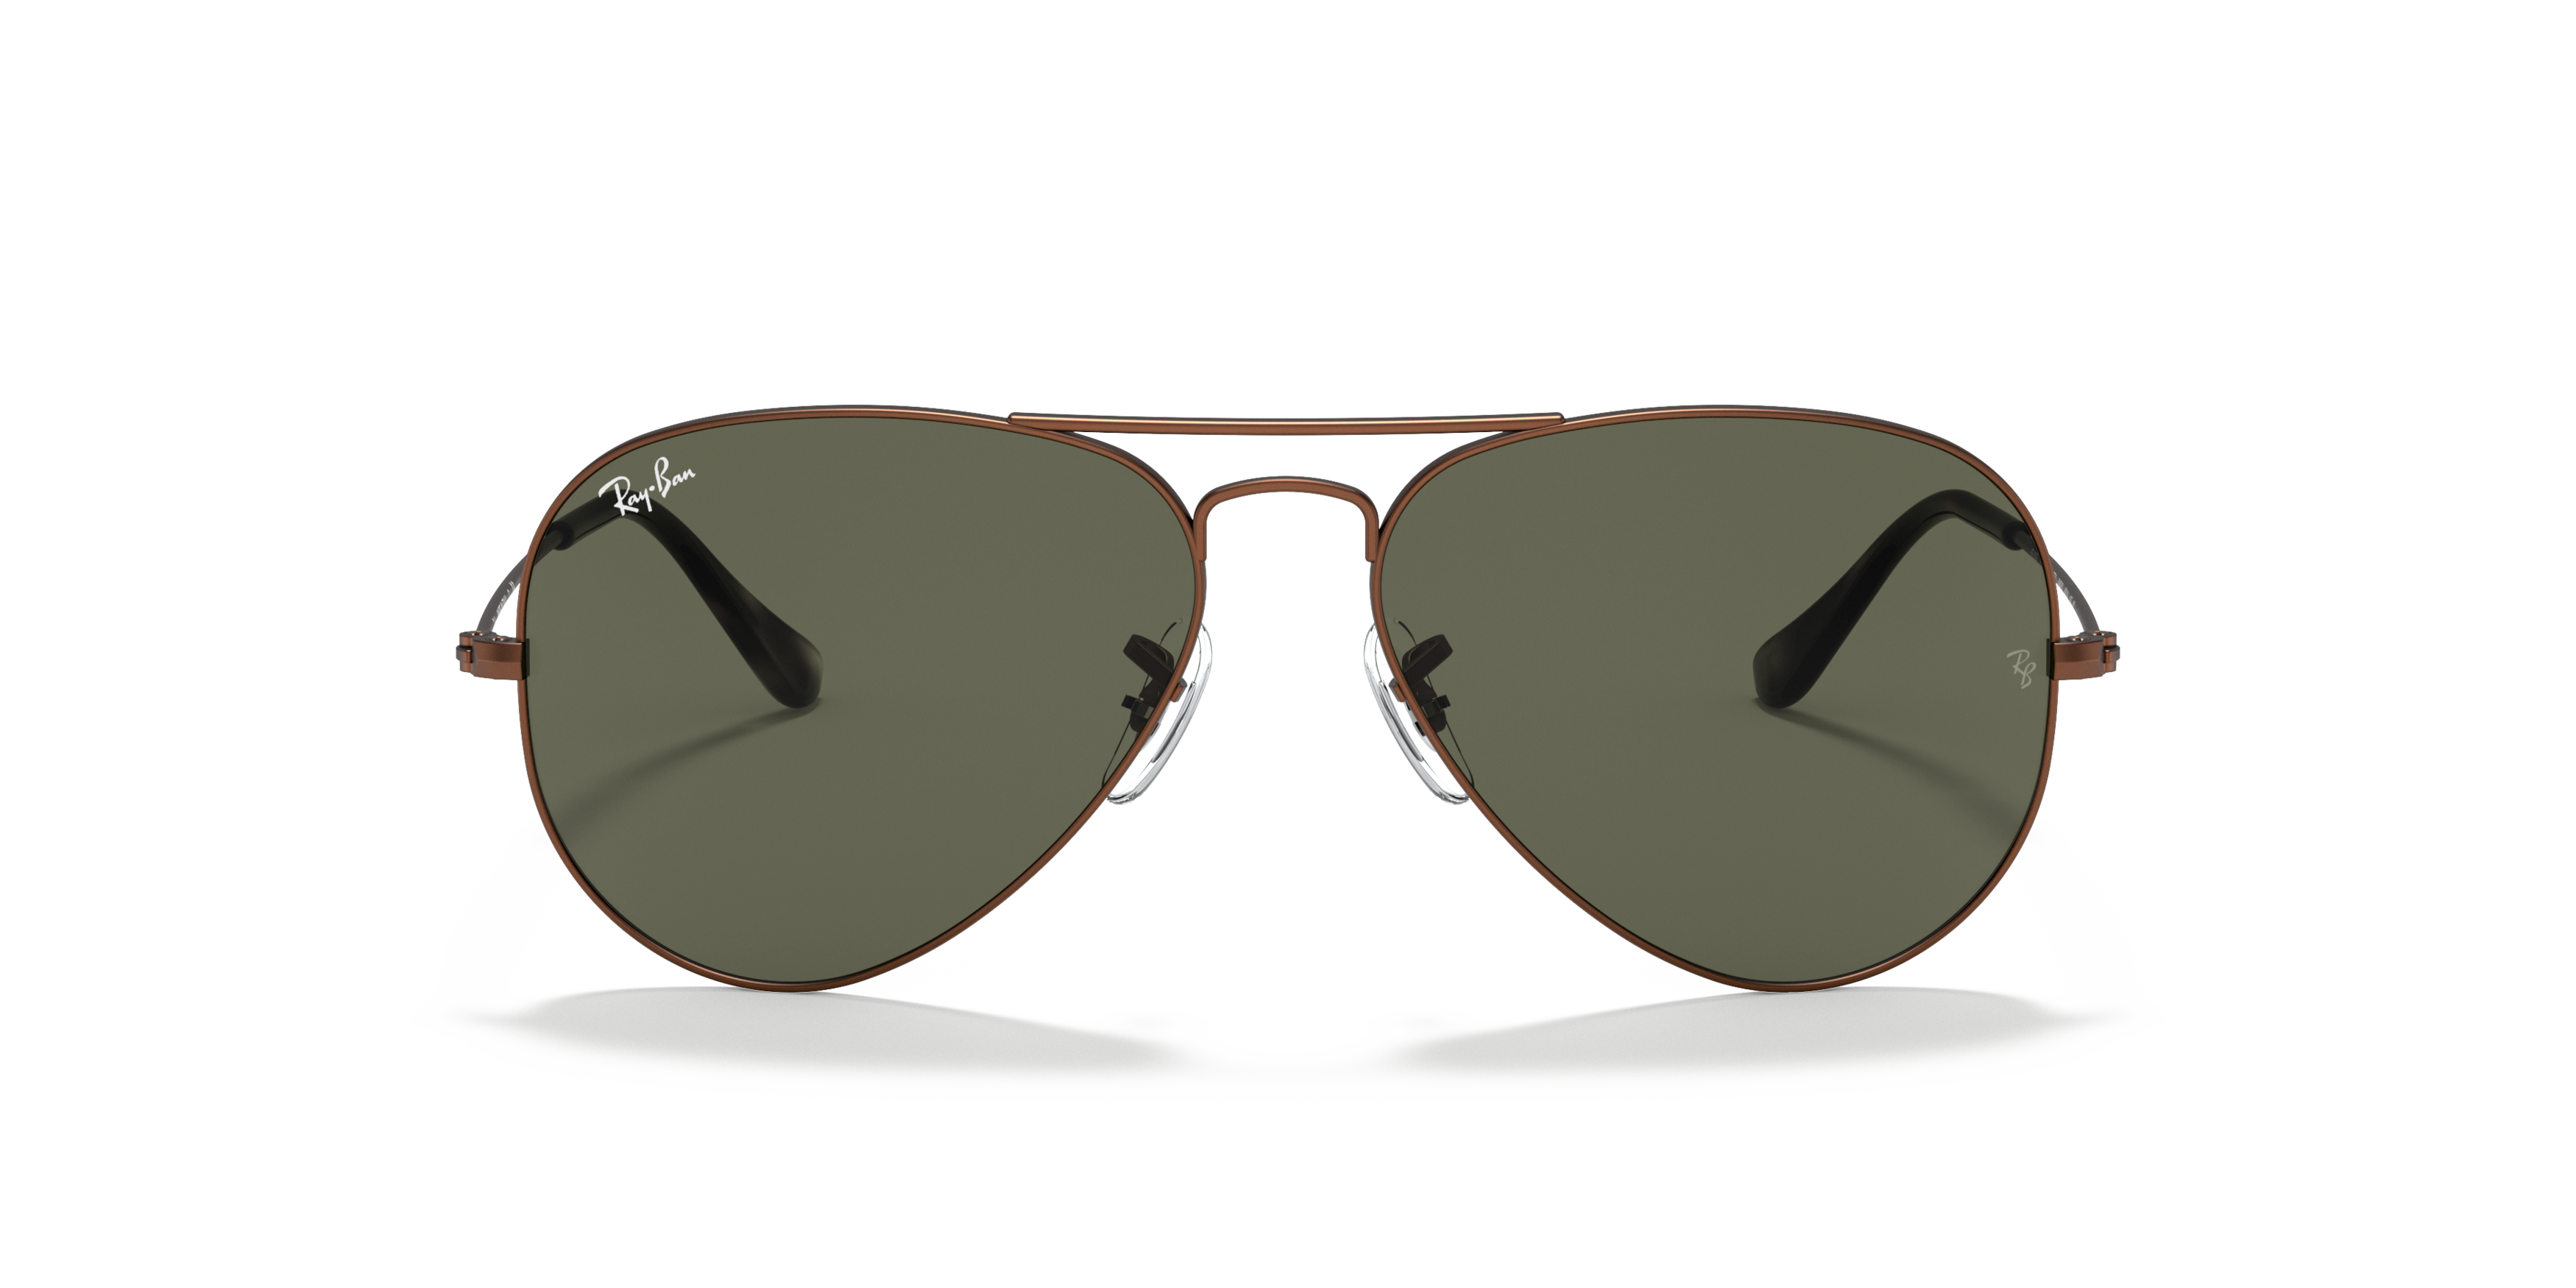 [products.image.front] Ray-Ban Aviator Classic RB3025 918931